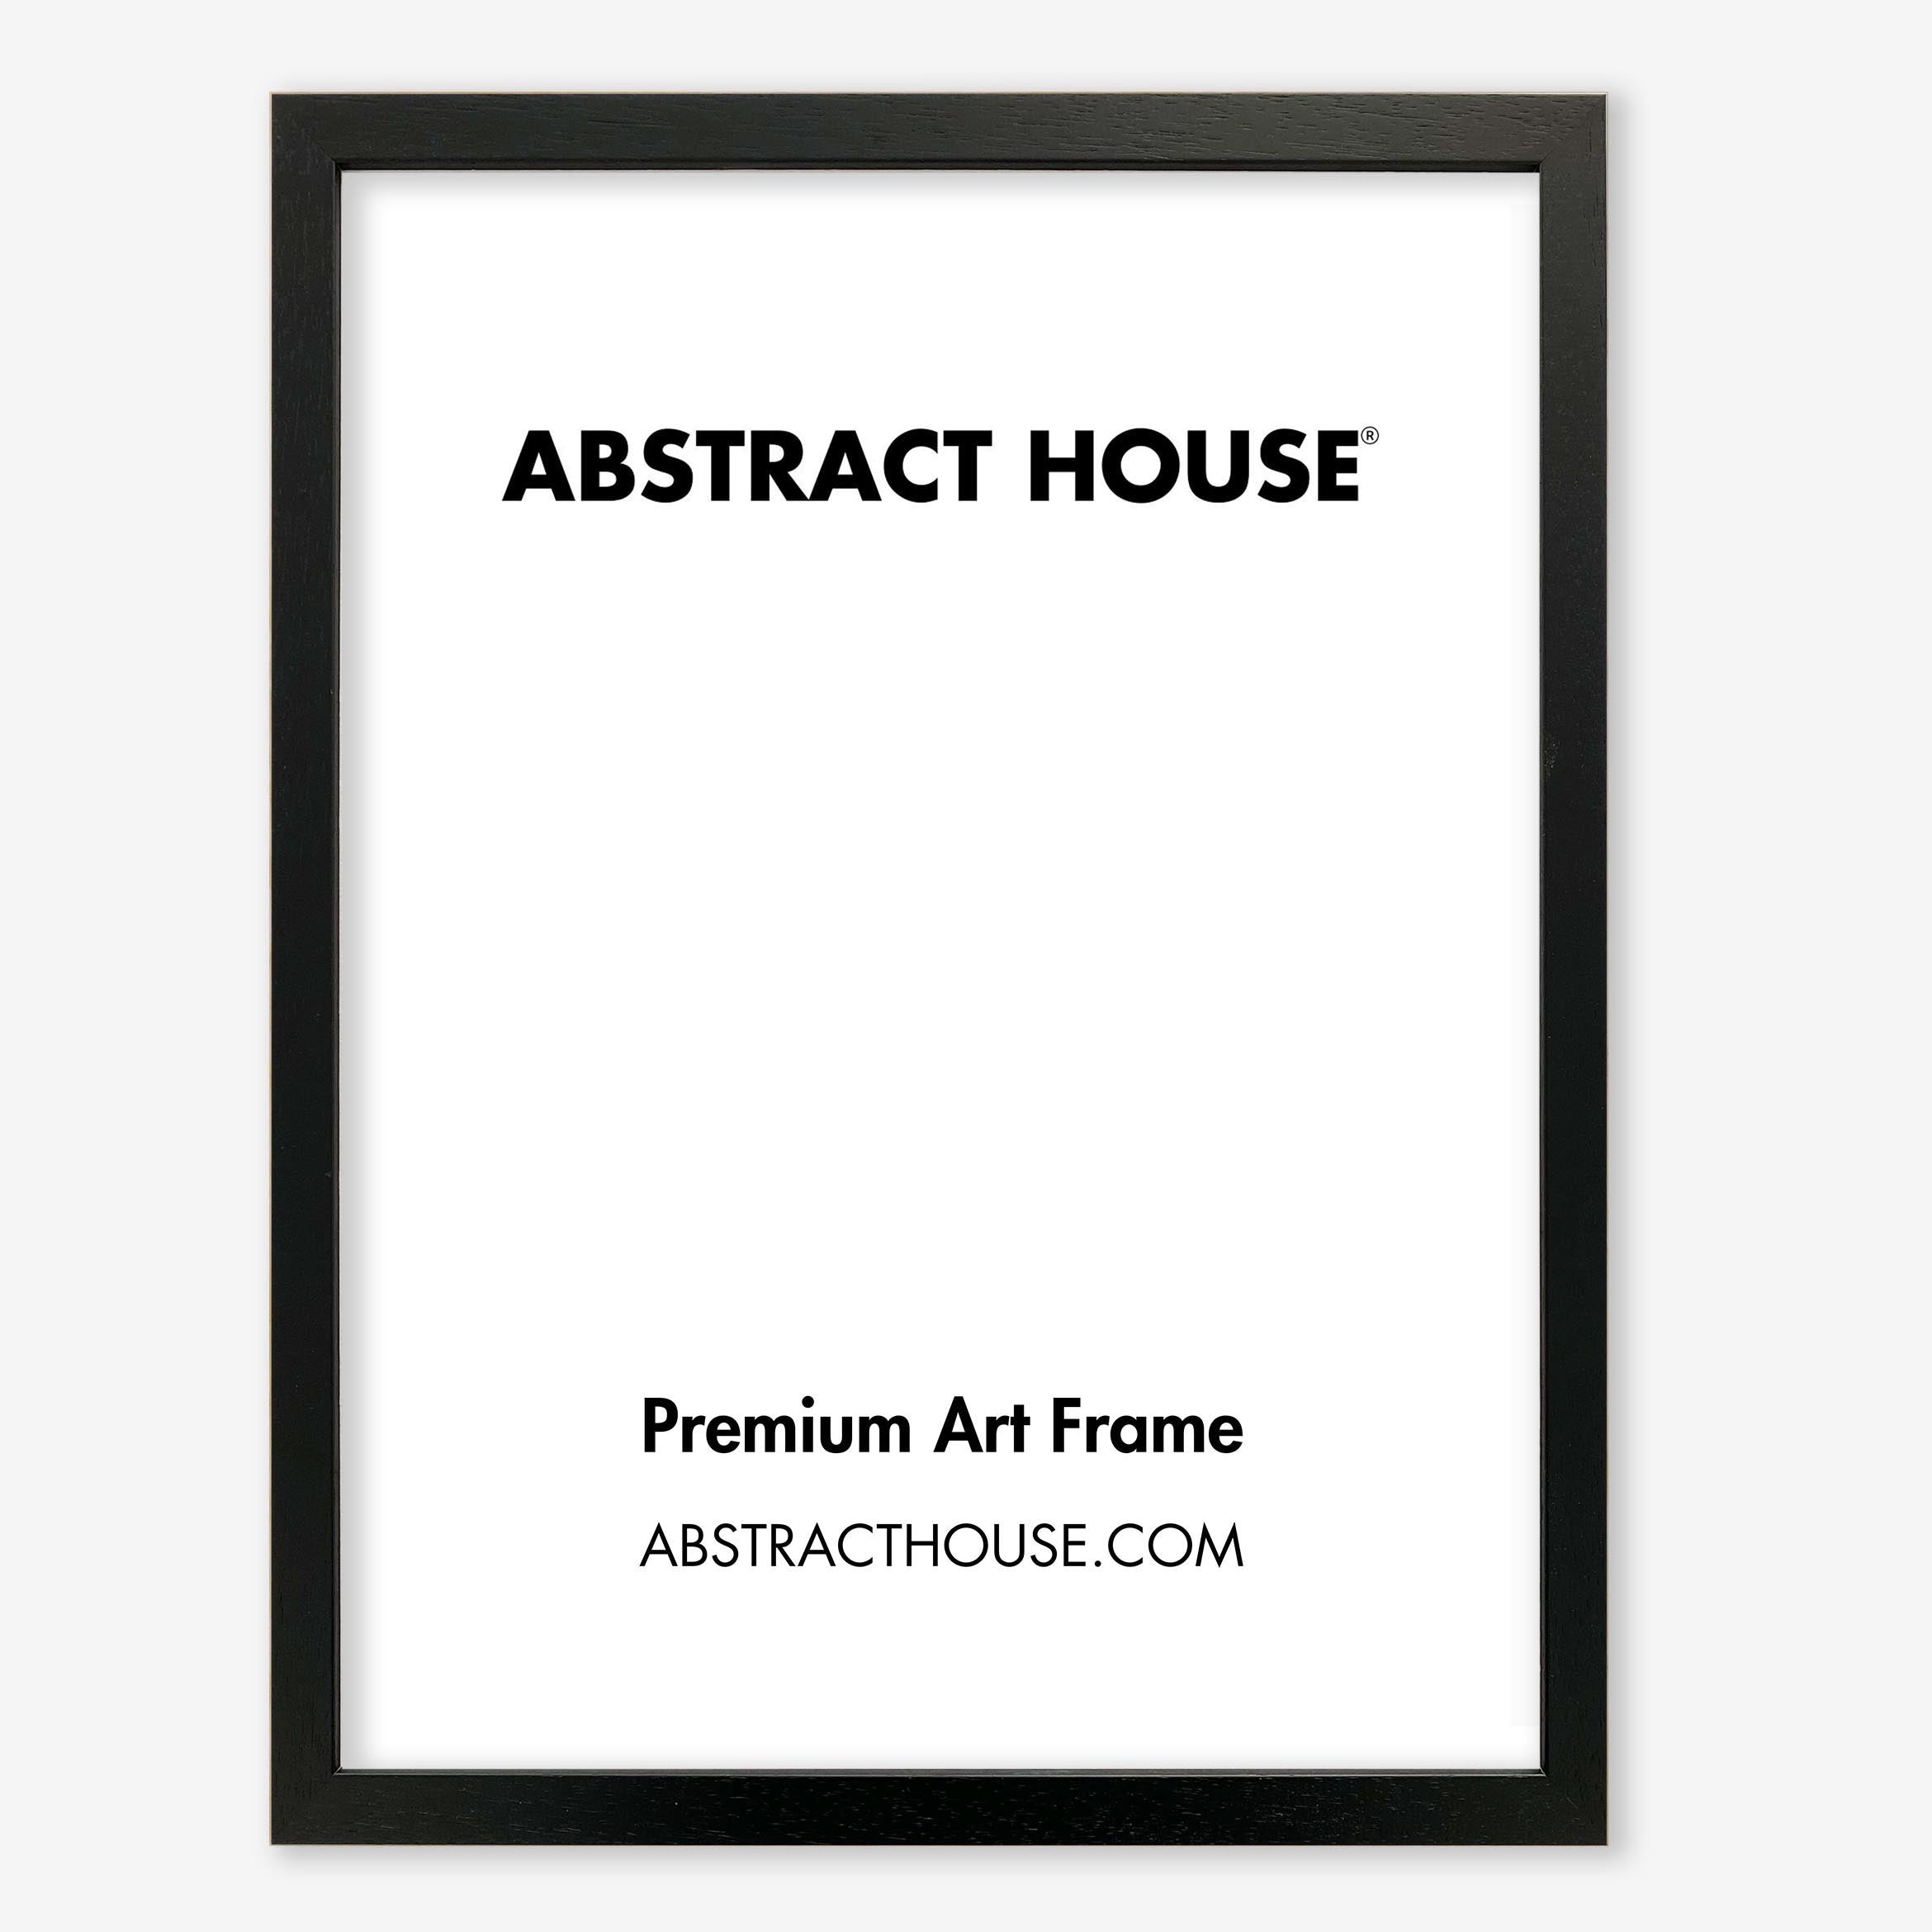 8x10 Inch Wooden Frame-Black-No Mount-Abstract House